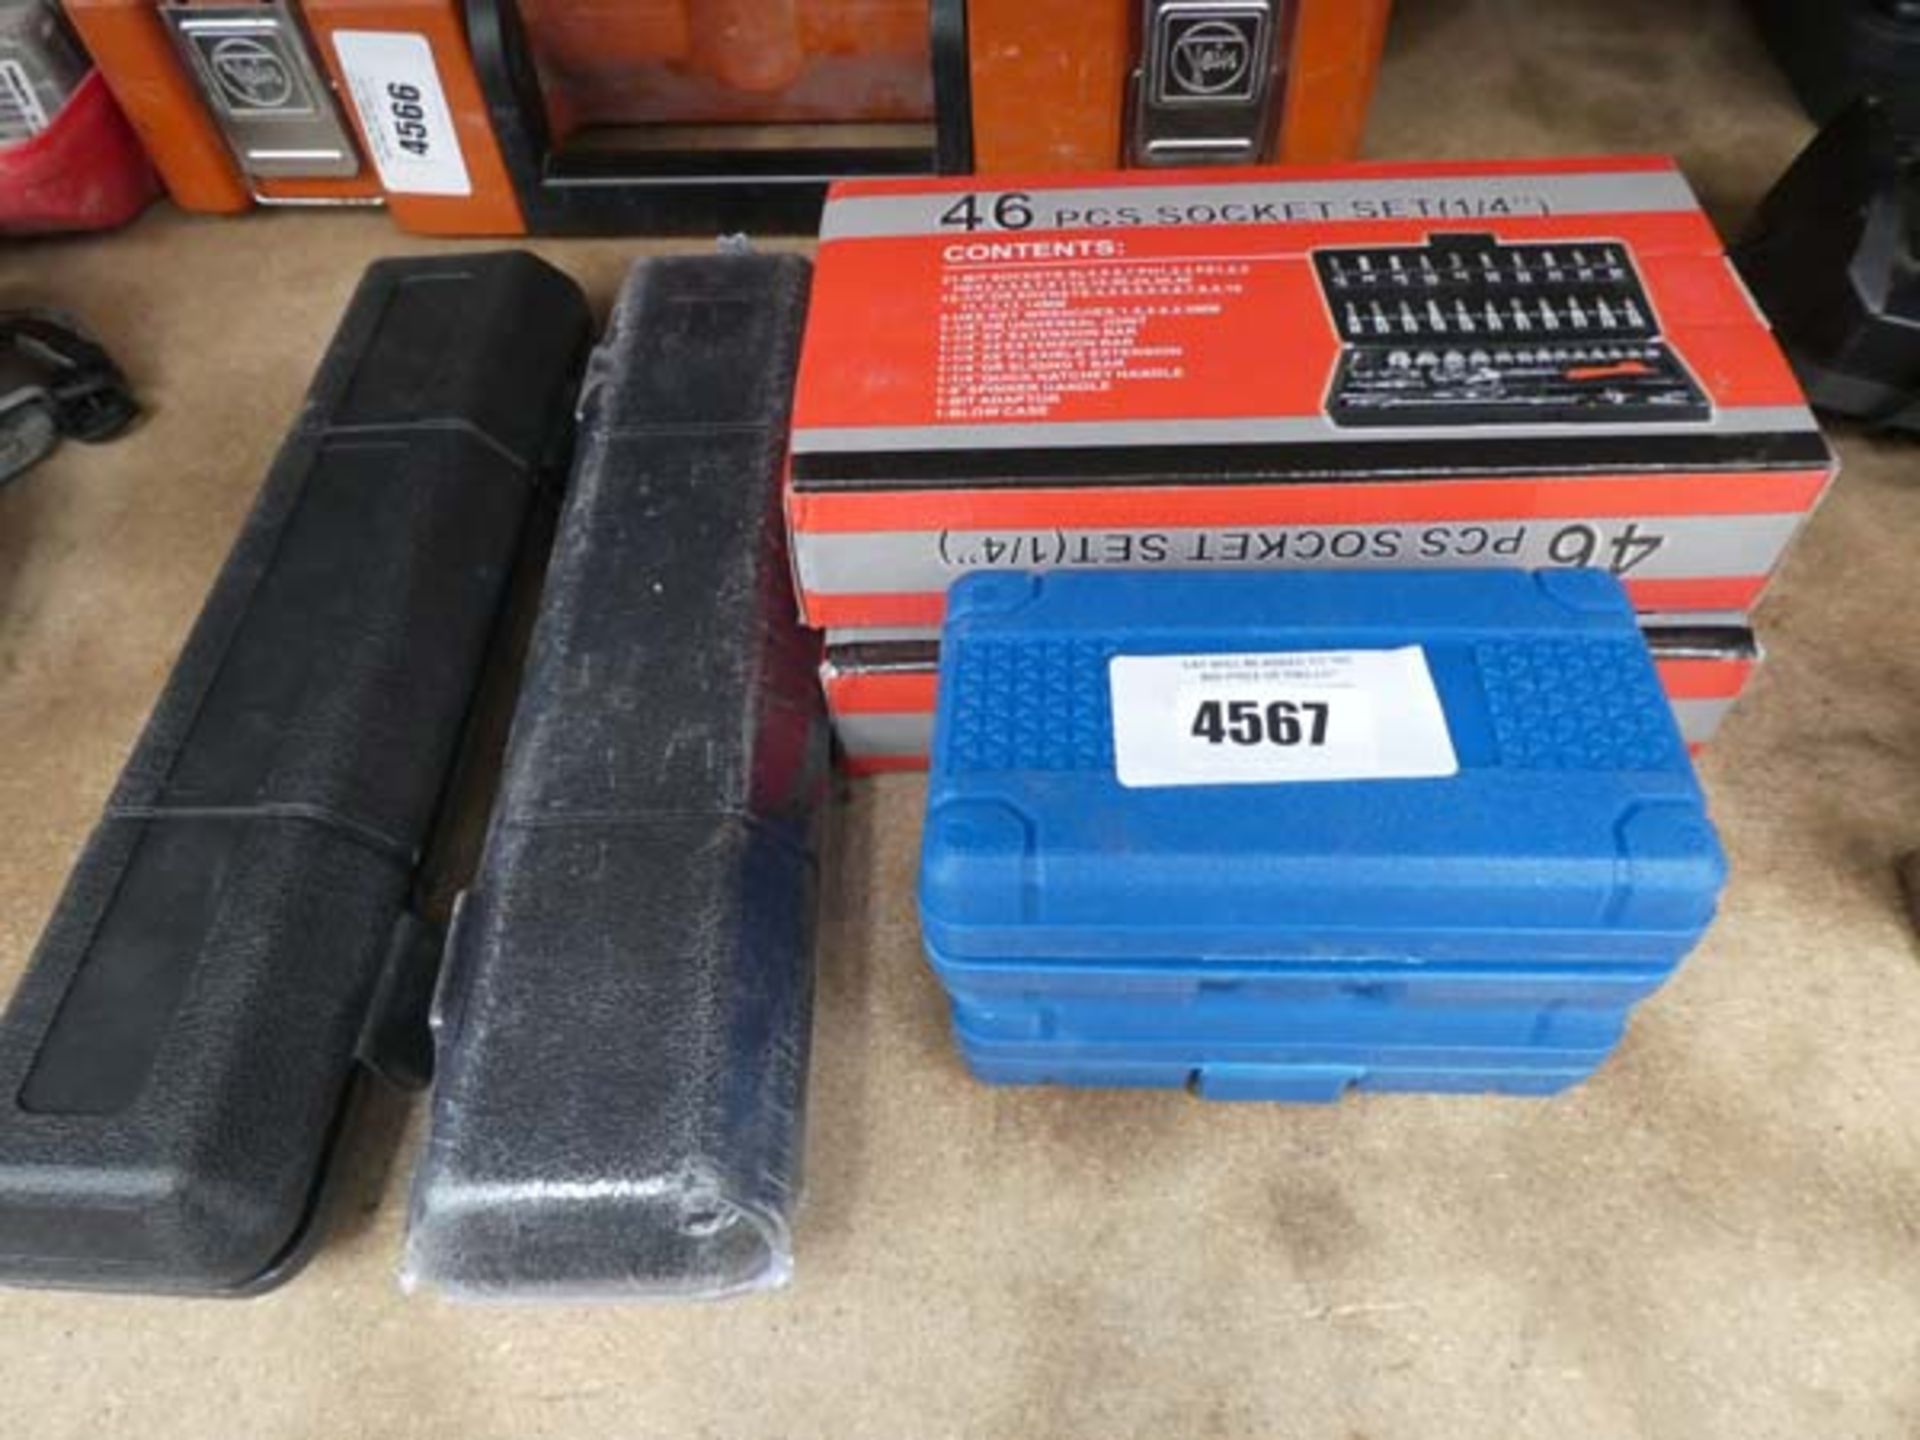 2 mini socket sets, 2 x 46 piece socket sets and 2 wrenches